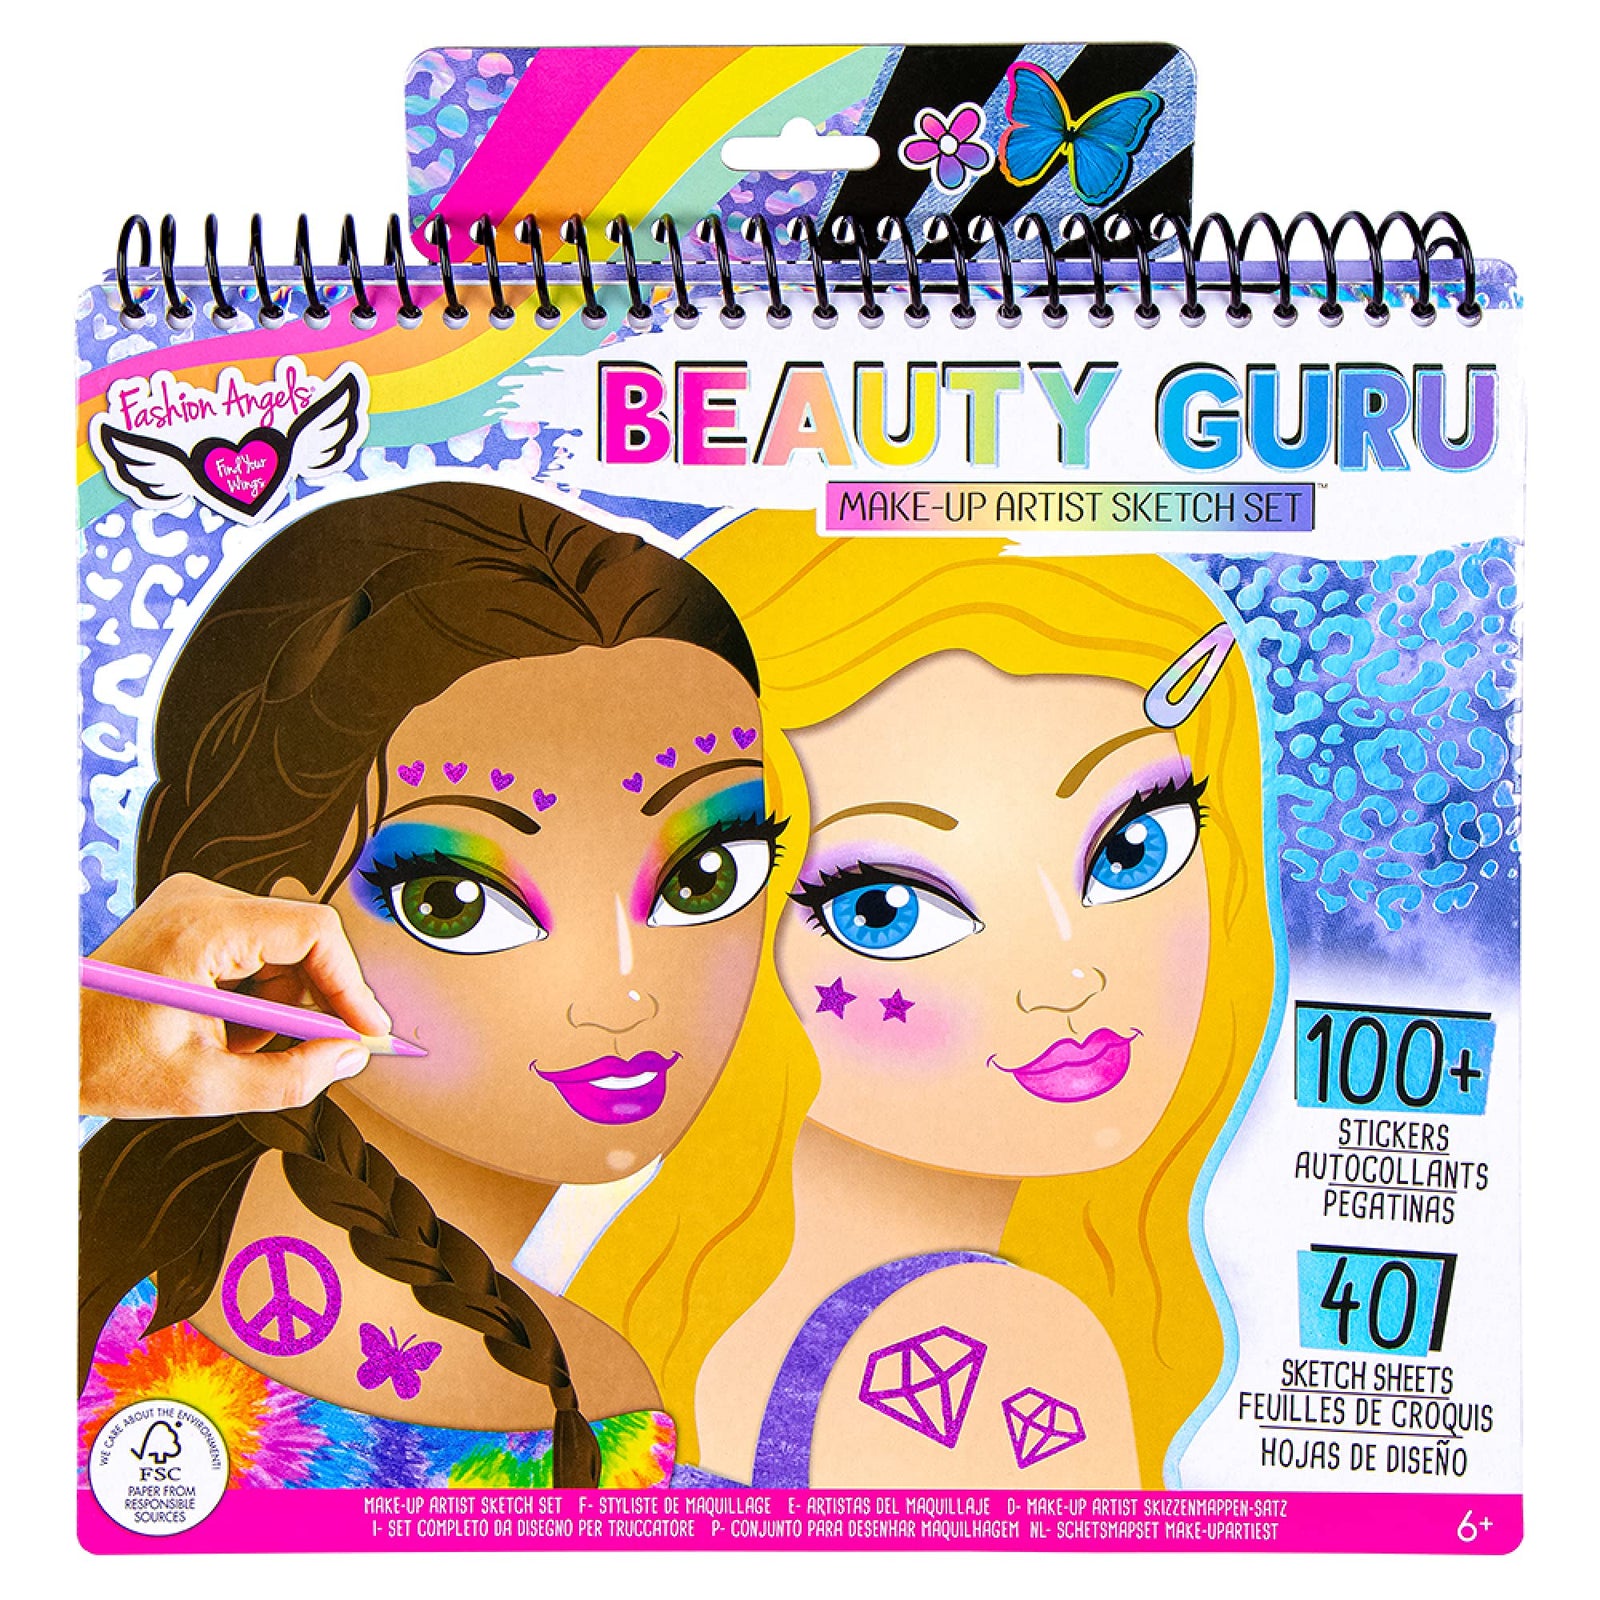 Make-up & Hair Design Sketch Portfolio (11452) Sketchbook for Beginners, Sketchbook with Stencils and Stickers for Ages 6 and Up